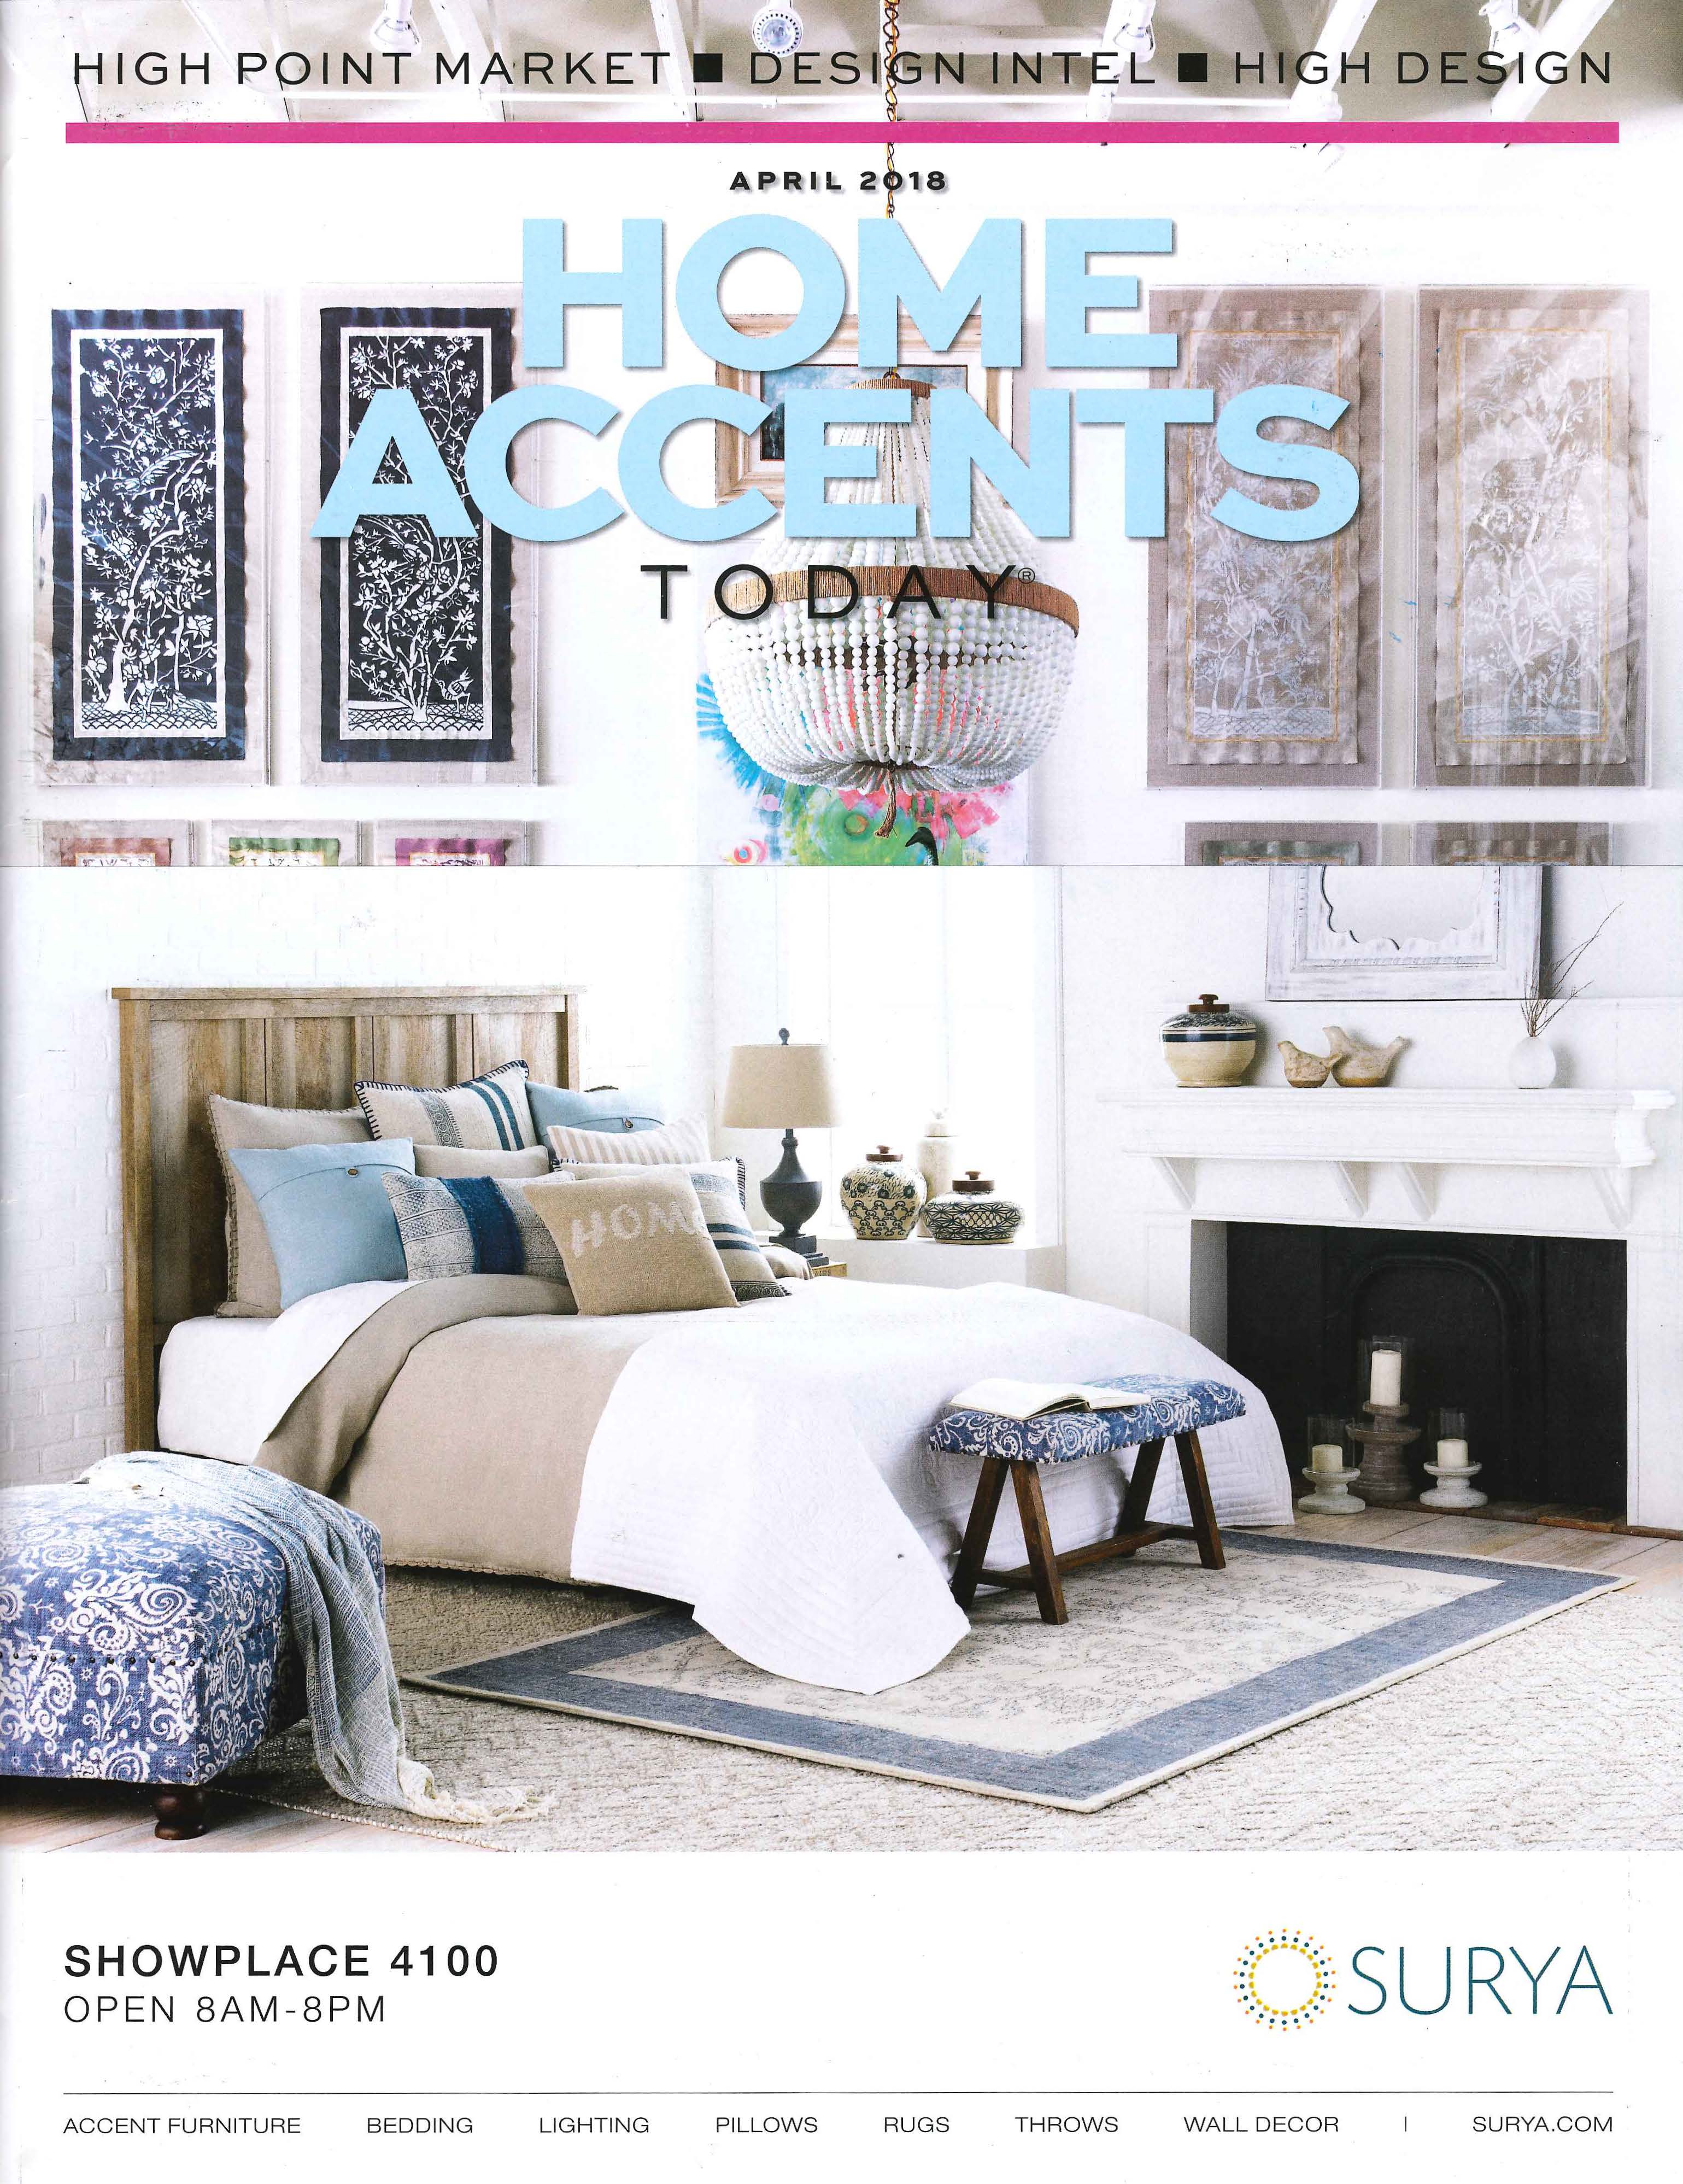 Home Accents Today cover for the April 2018 issue featuring an interview of joni vanderslice